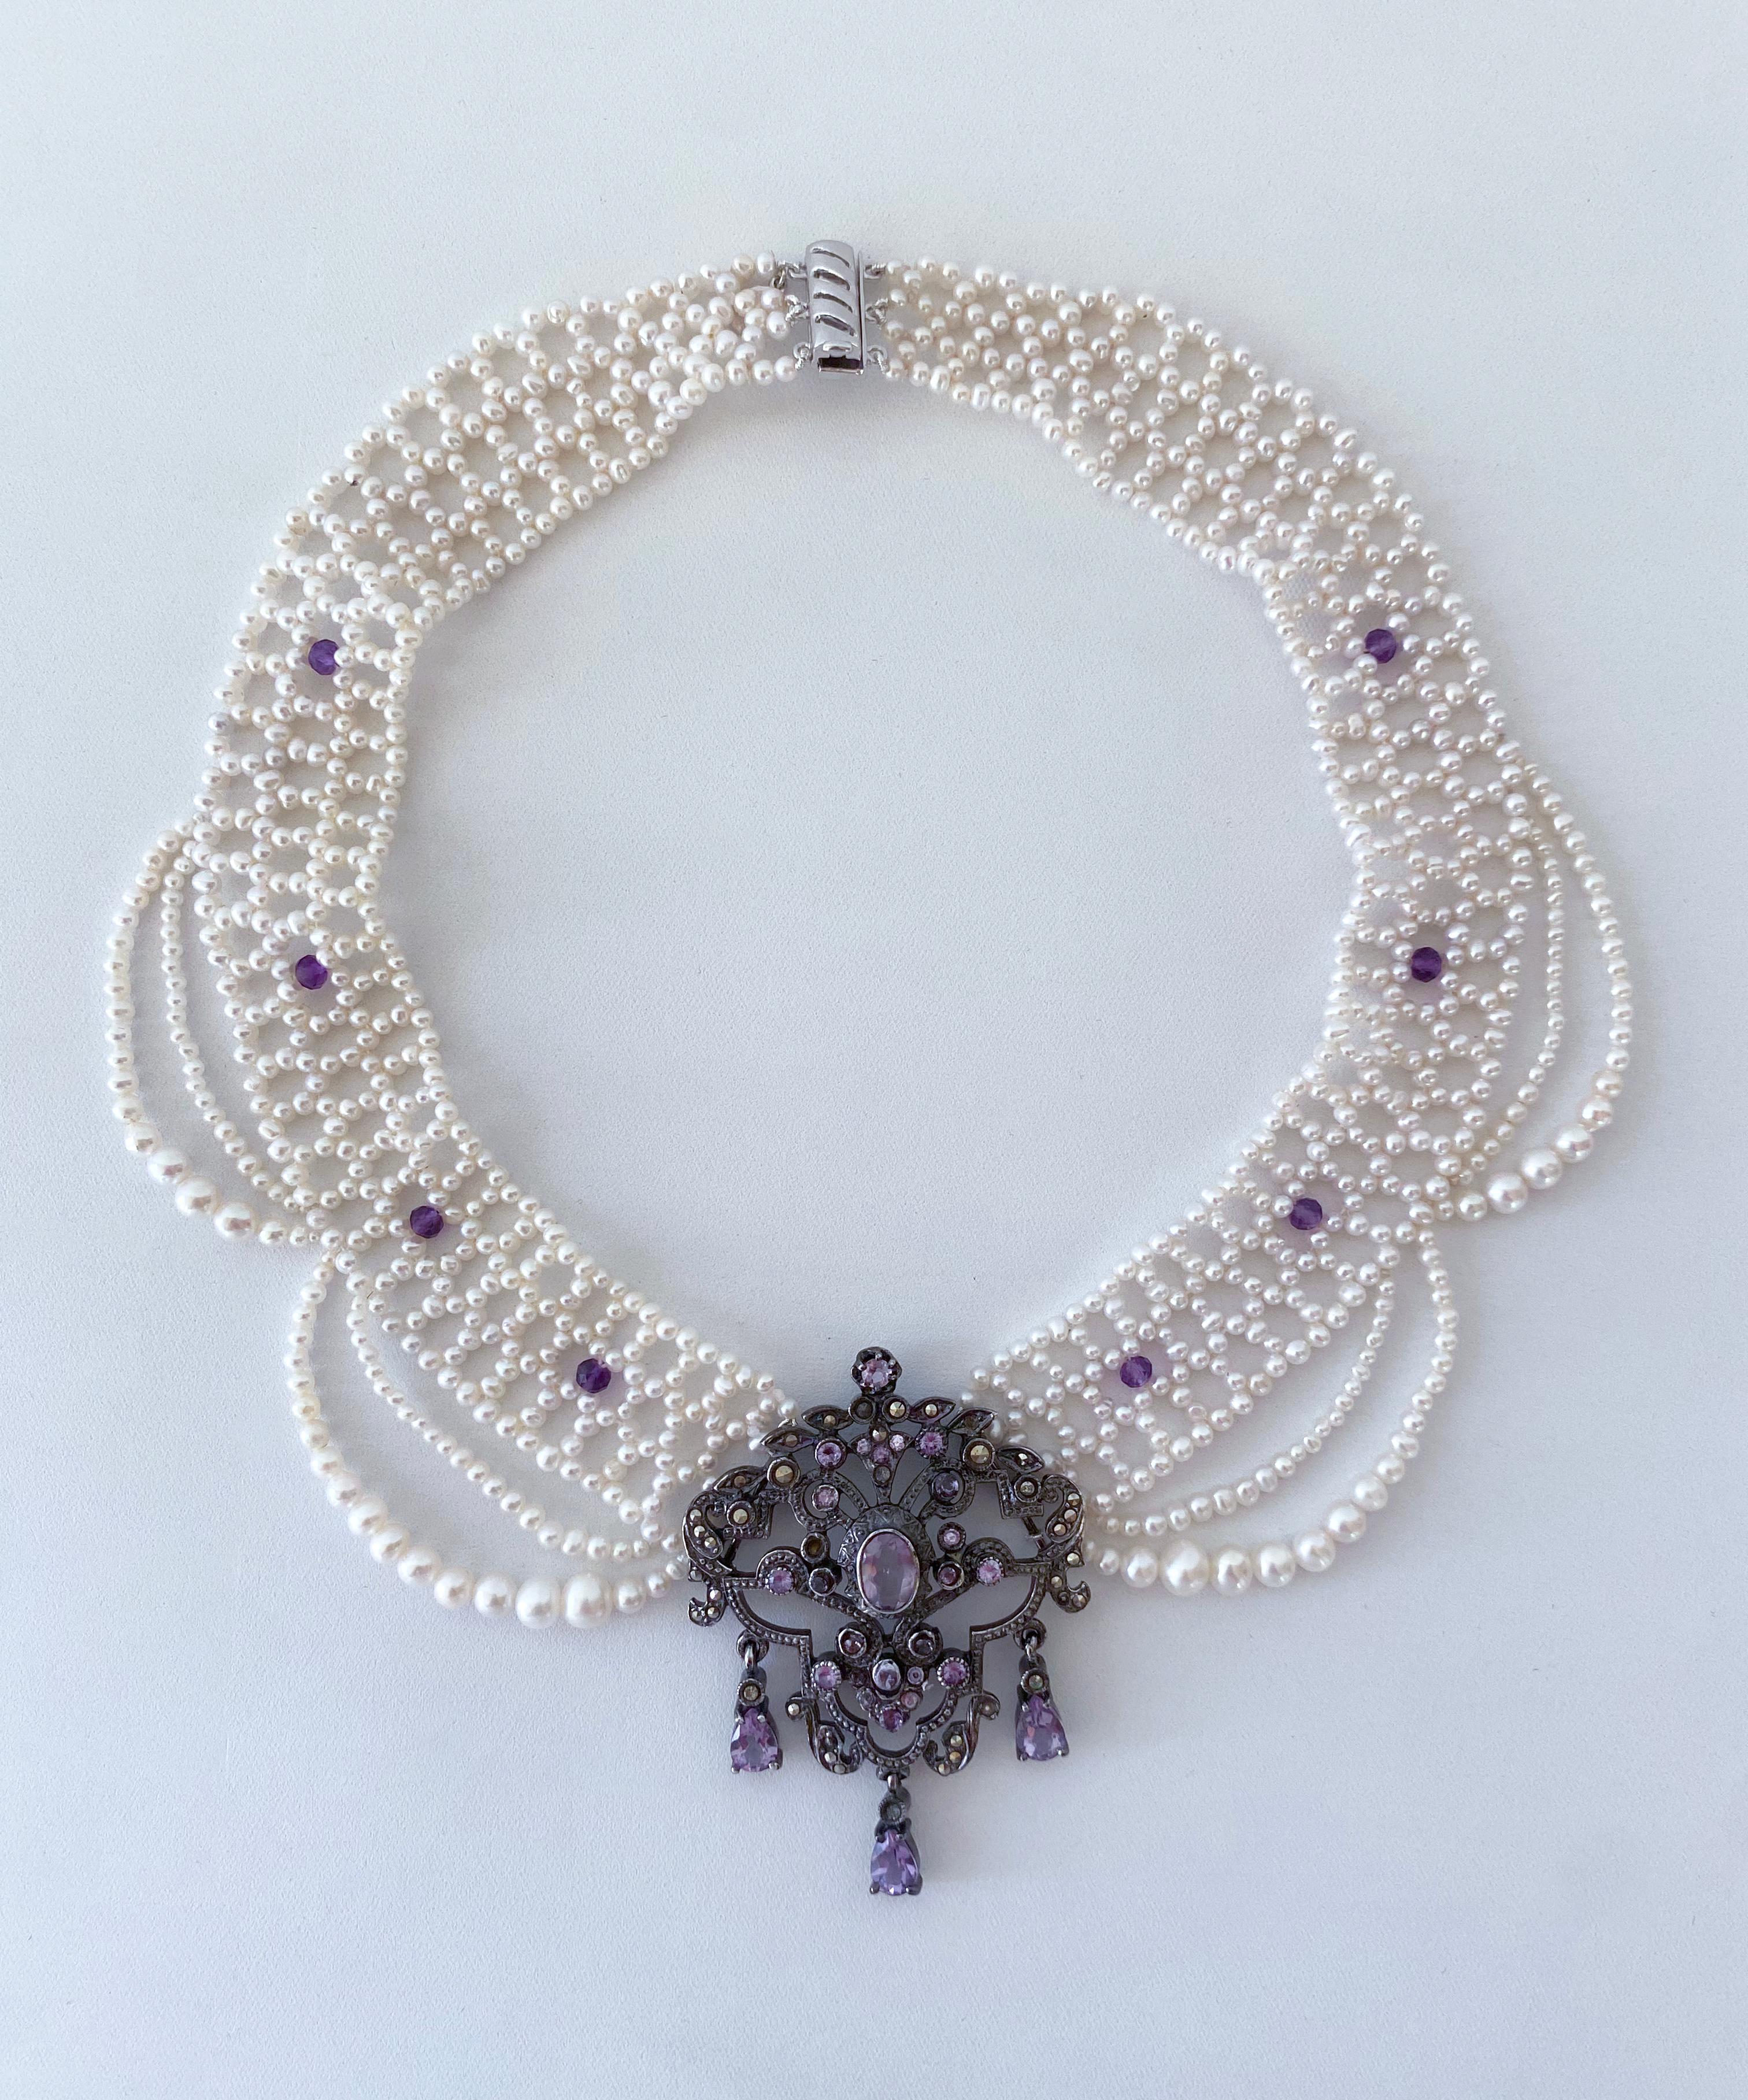 Marina J. Unique Pearl Draped Necklace with Vintage Amethyst Silver Centerpiece For Sale 4